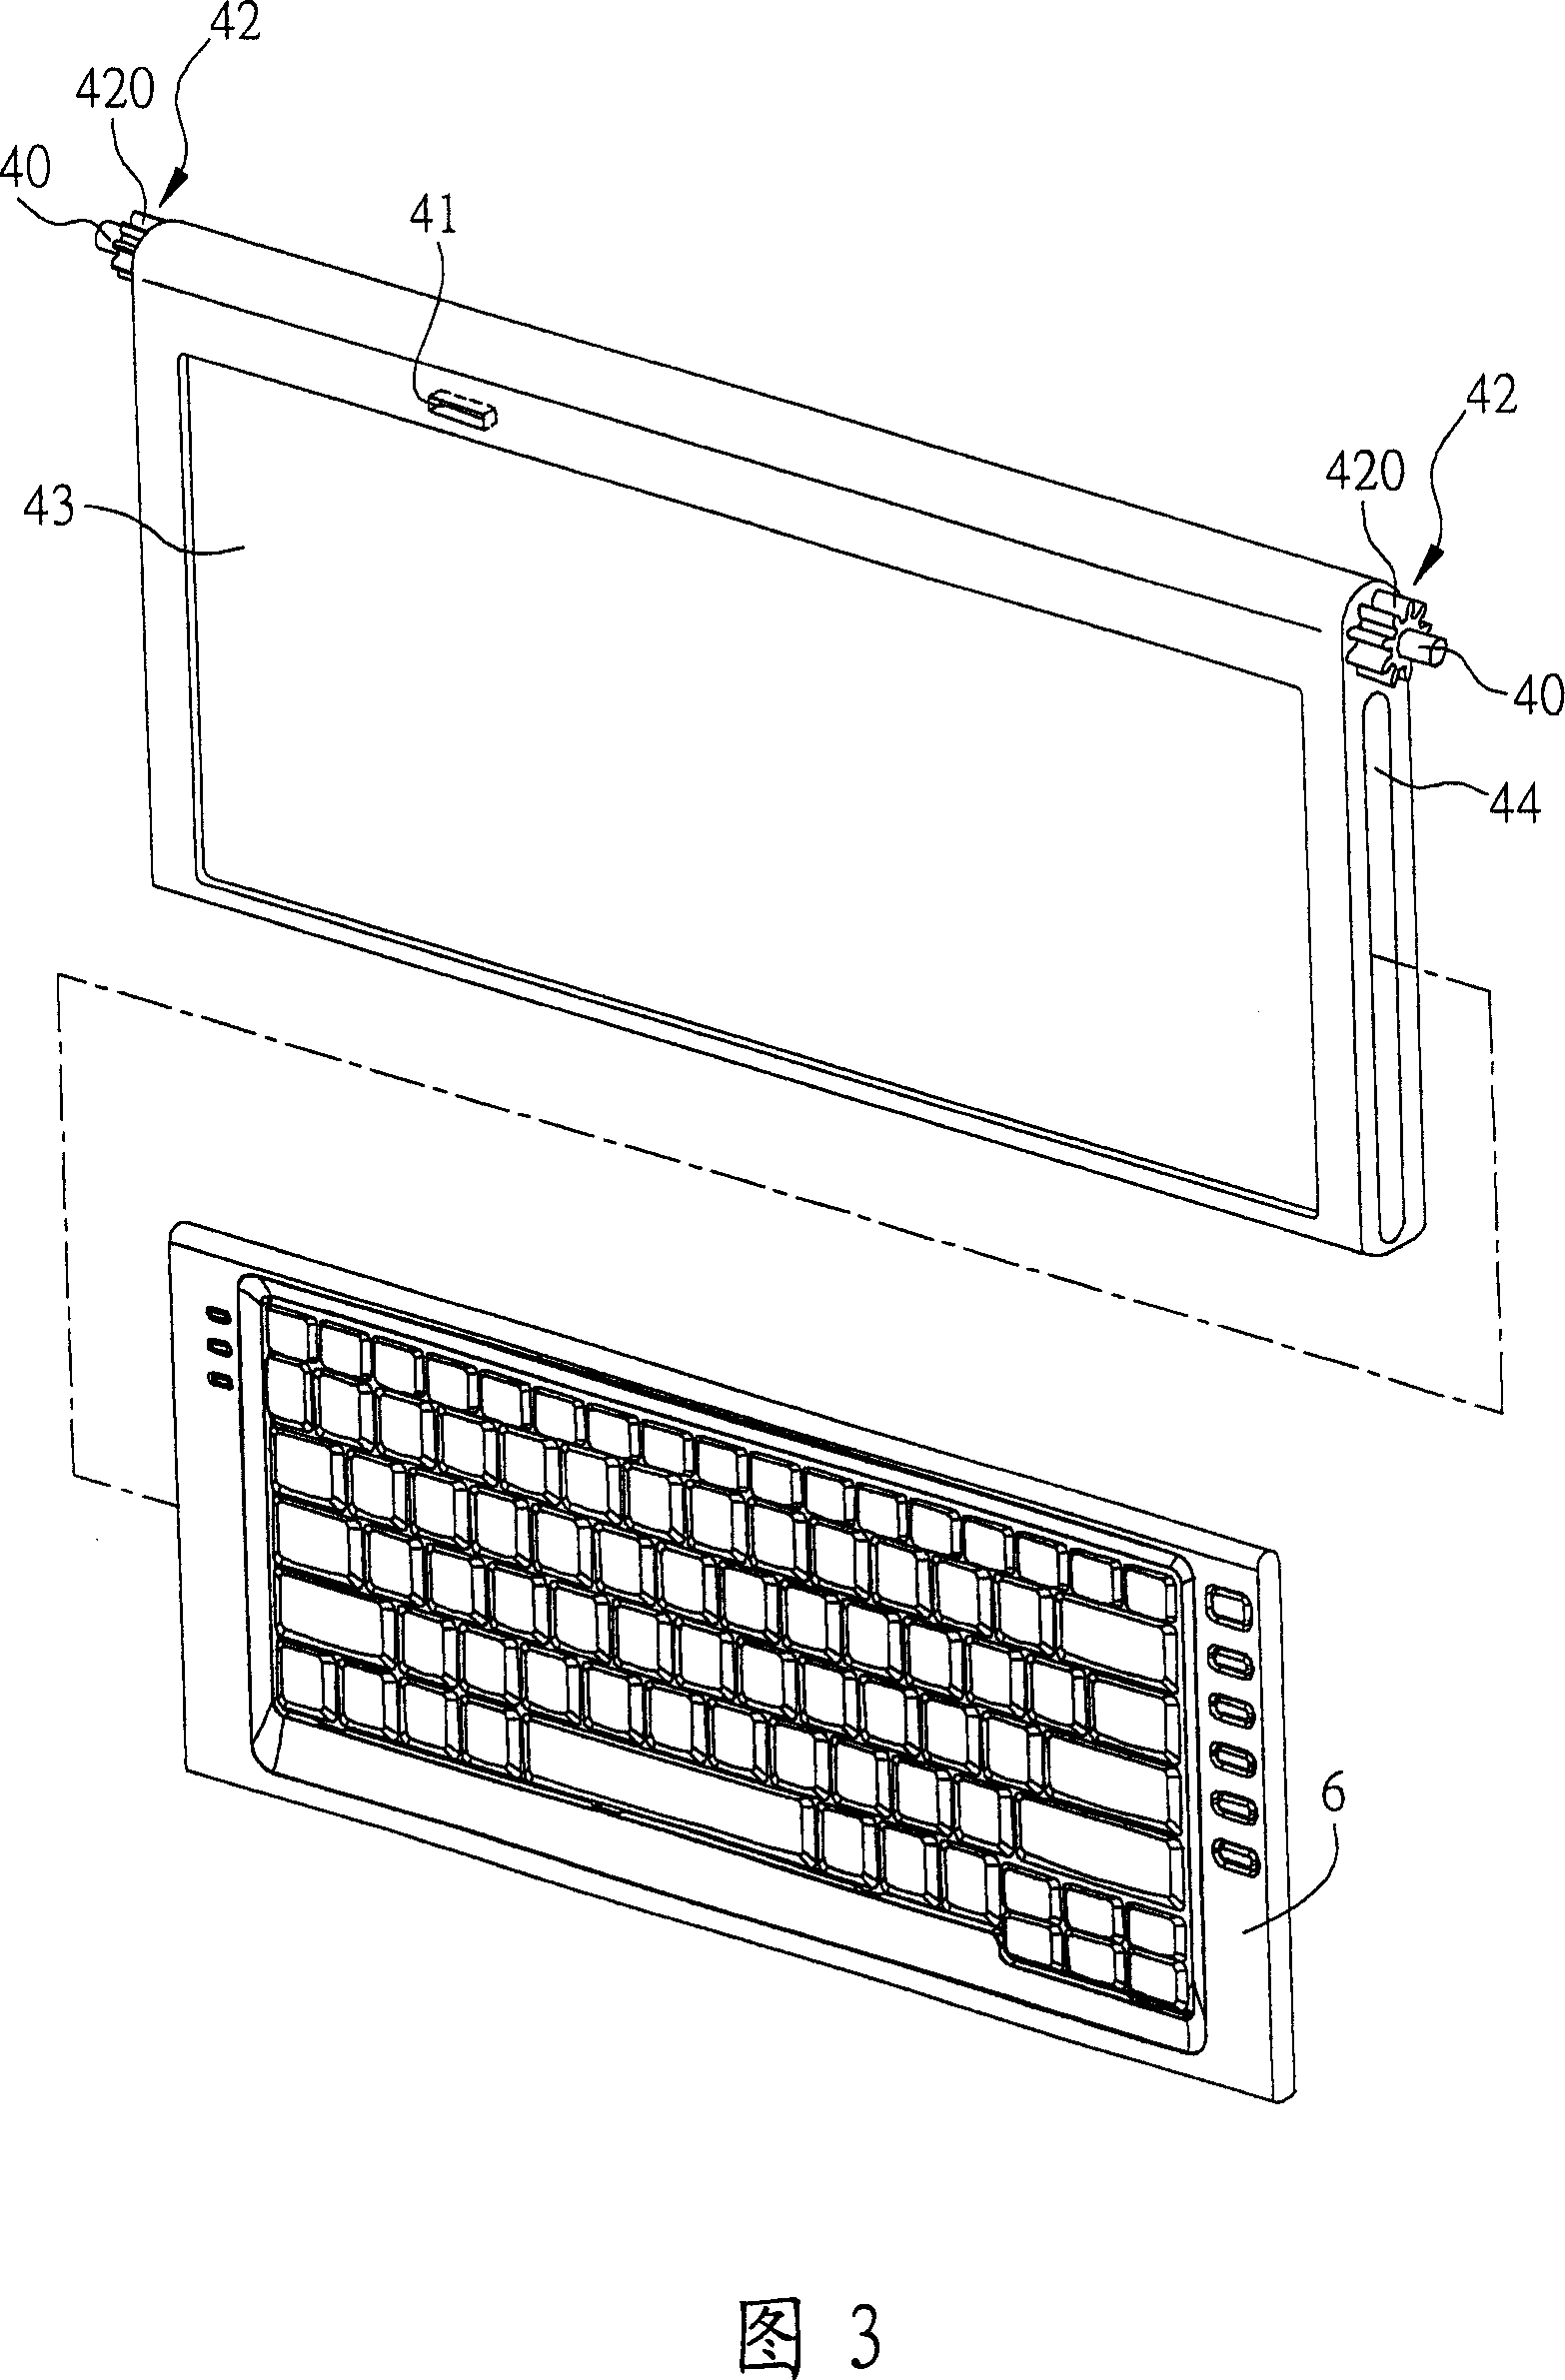 Electronic device capable of single hand hanging or flat placing